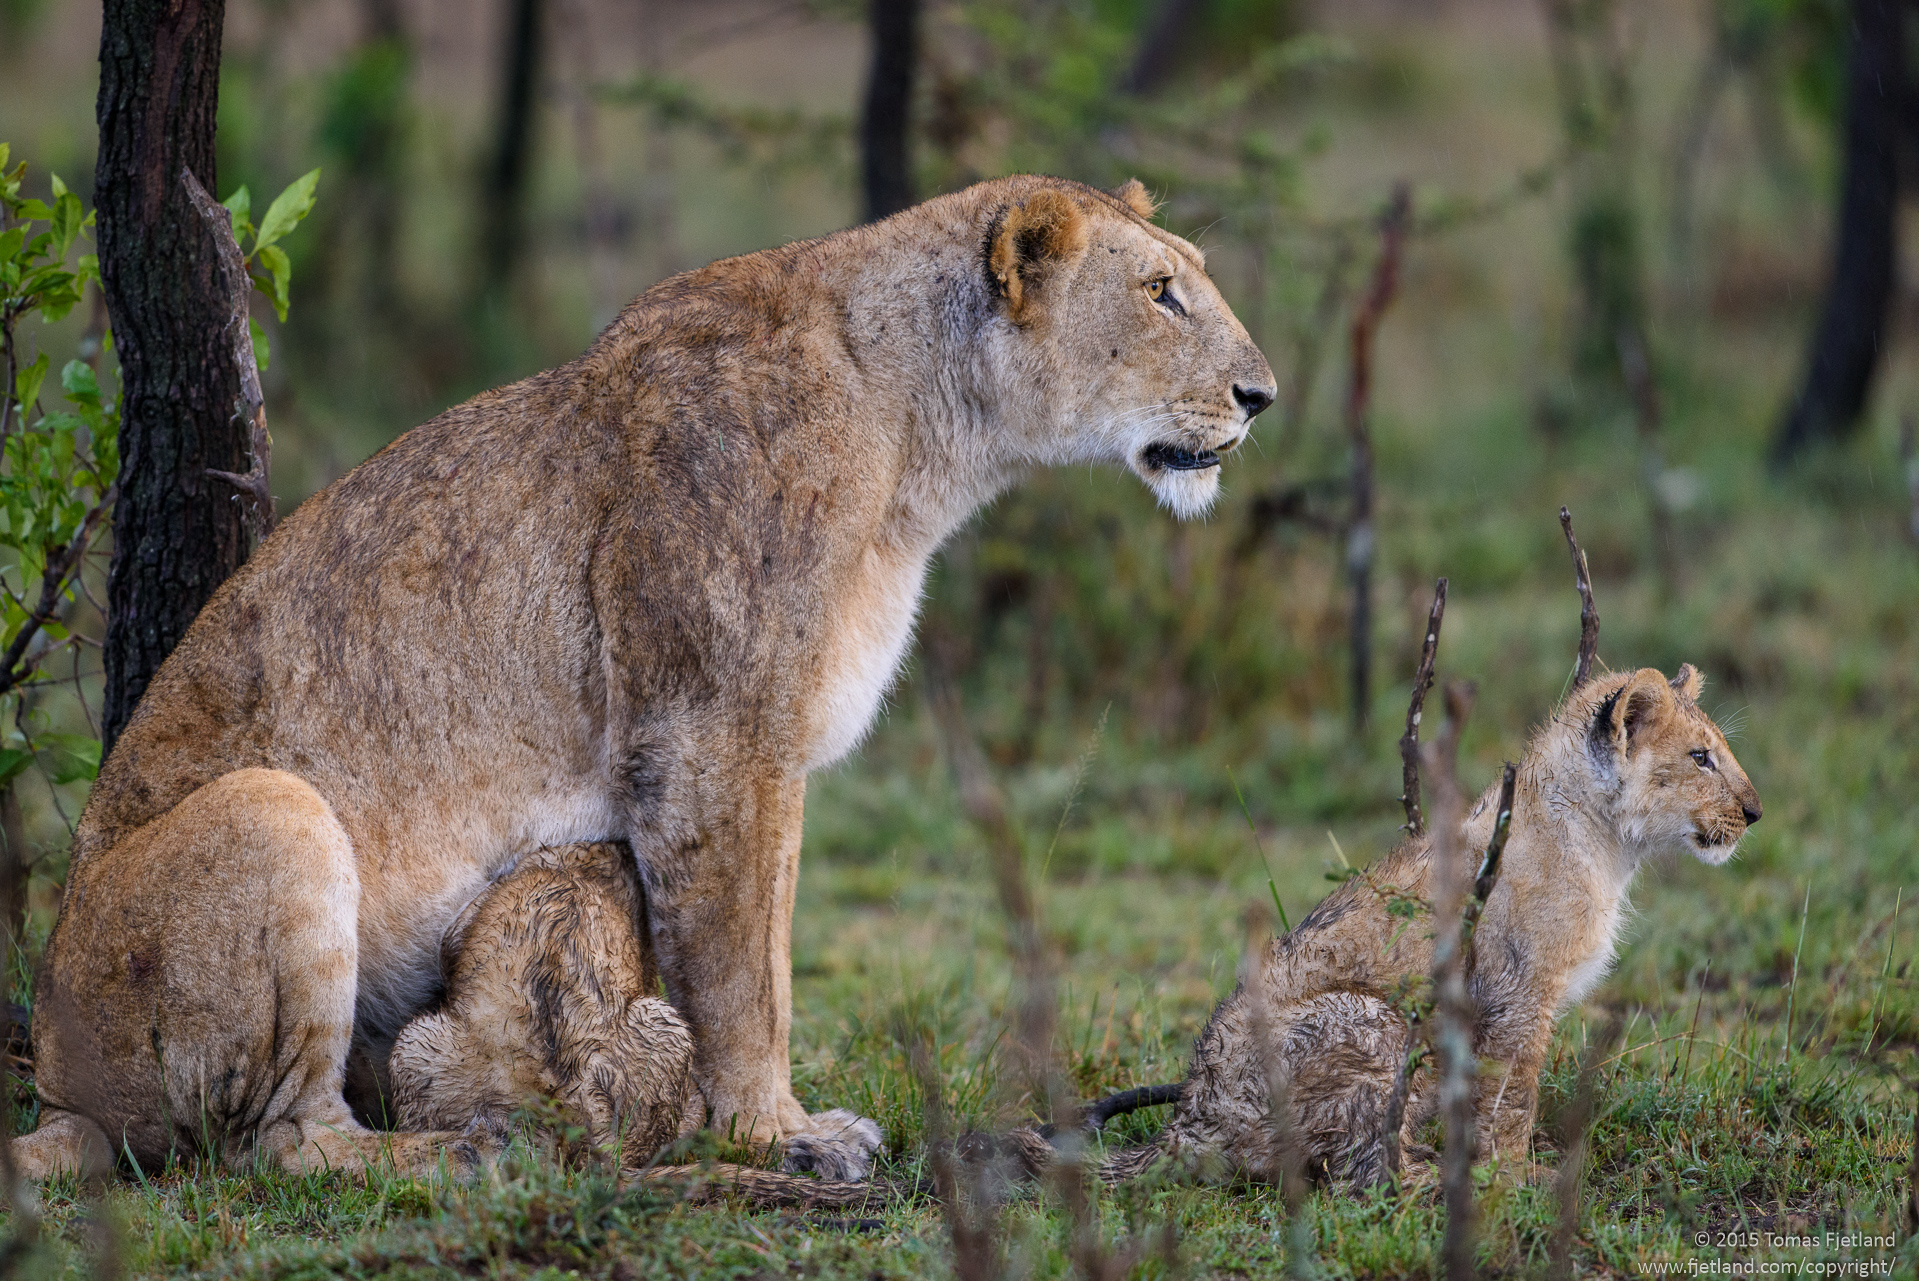 This lioness was less than 50 meters from two males and a couple of other females. With her two cubs with her, she was keeping a close eye on the males